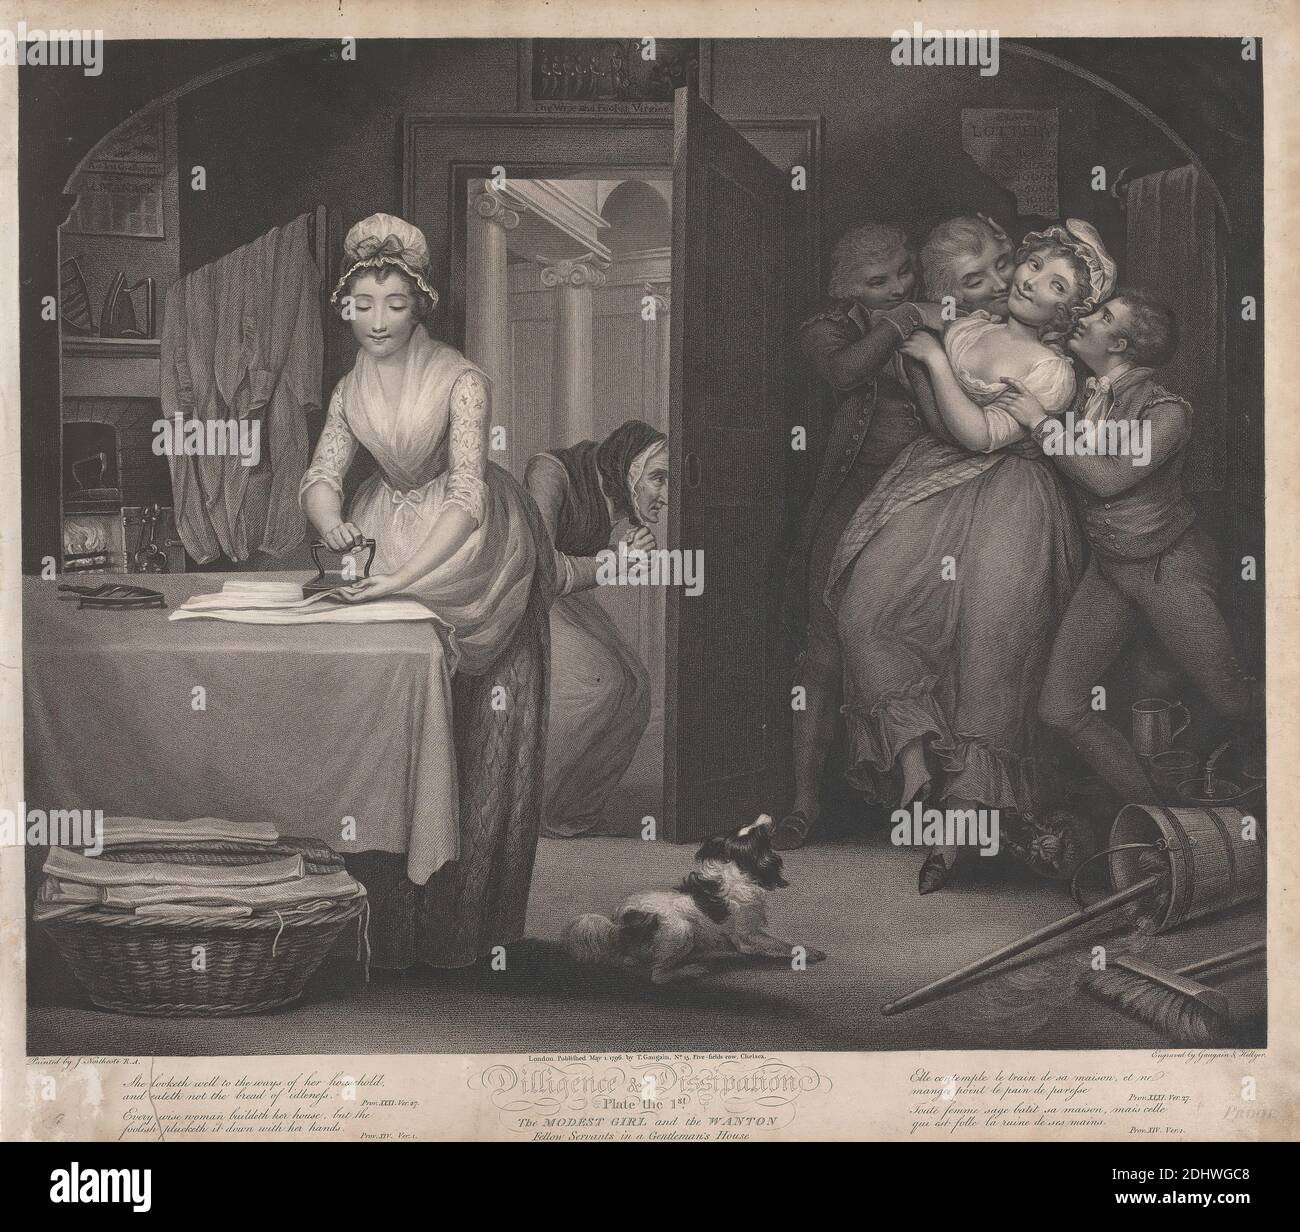 Diligence and Dissipation: The Modest Girl and the Wanton/ Fellow Servants in a Gentleman's House (Plate 1), Print made by Thomas Gaugain, 1748–1812, French, and Thomas Hellyer, active 1800, British, after James Northcote, 1746–1831, British, 1797, Stipple engraving, open letter proofs, Sheet: 18 1/2 x 20 13/16in. (47 x 52.9cm), bonnets, dog (animal), fireplace, iron, literary theme, men, servants Stock Photo